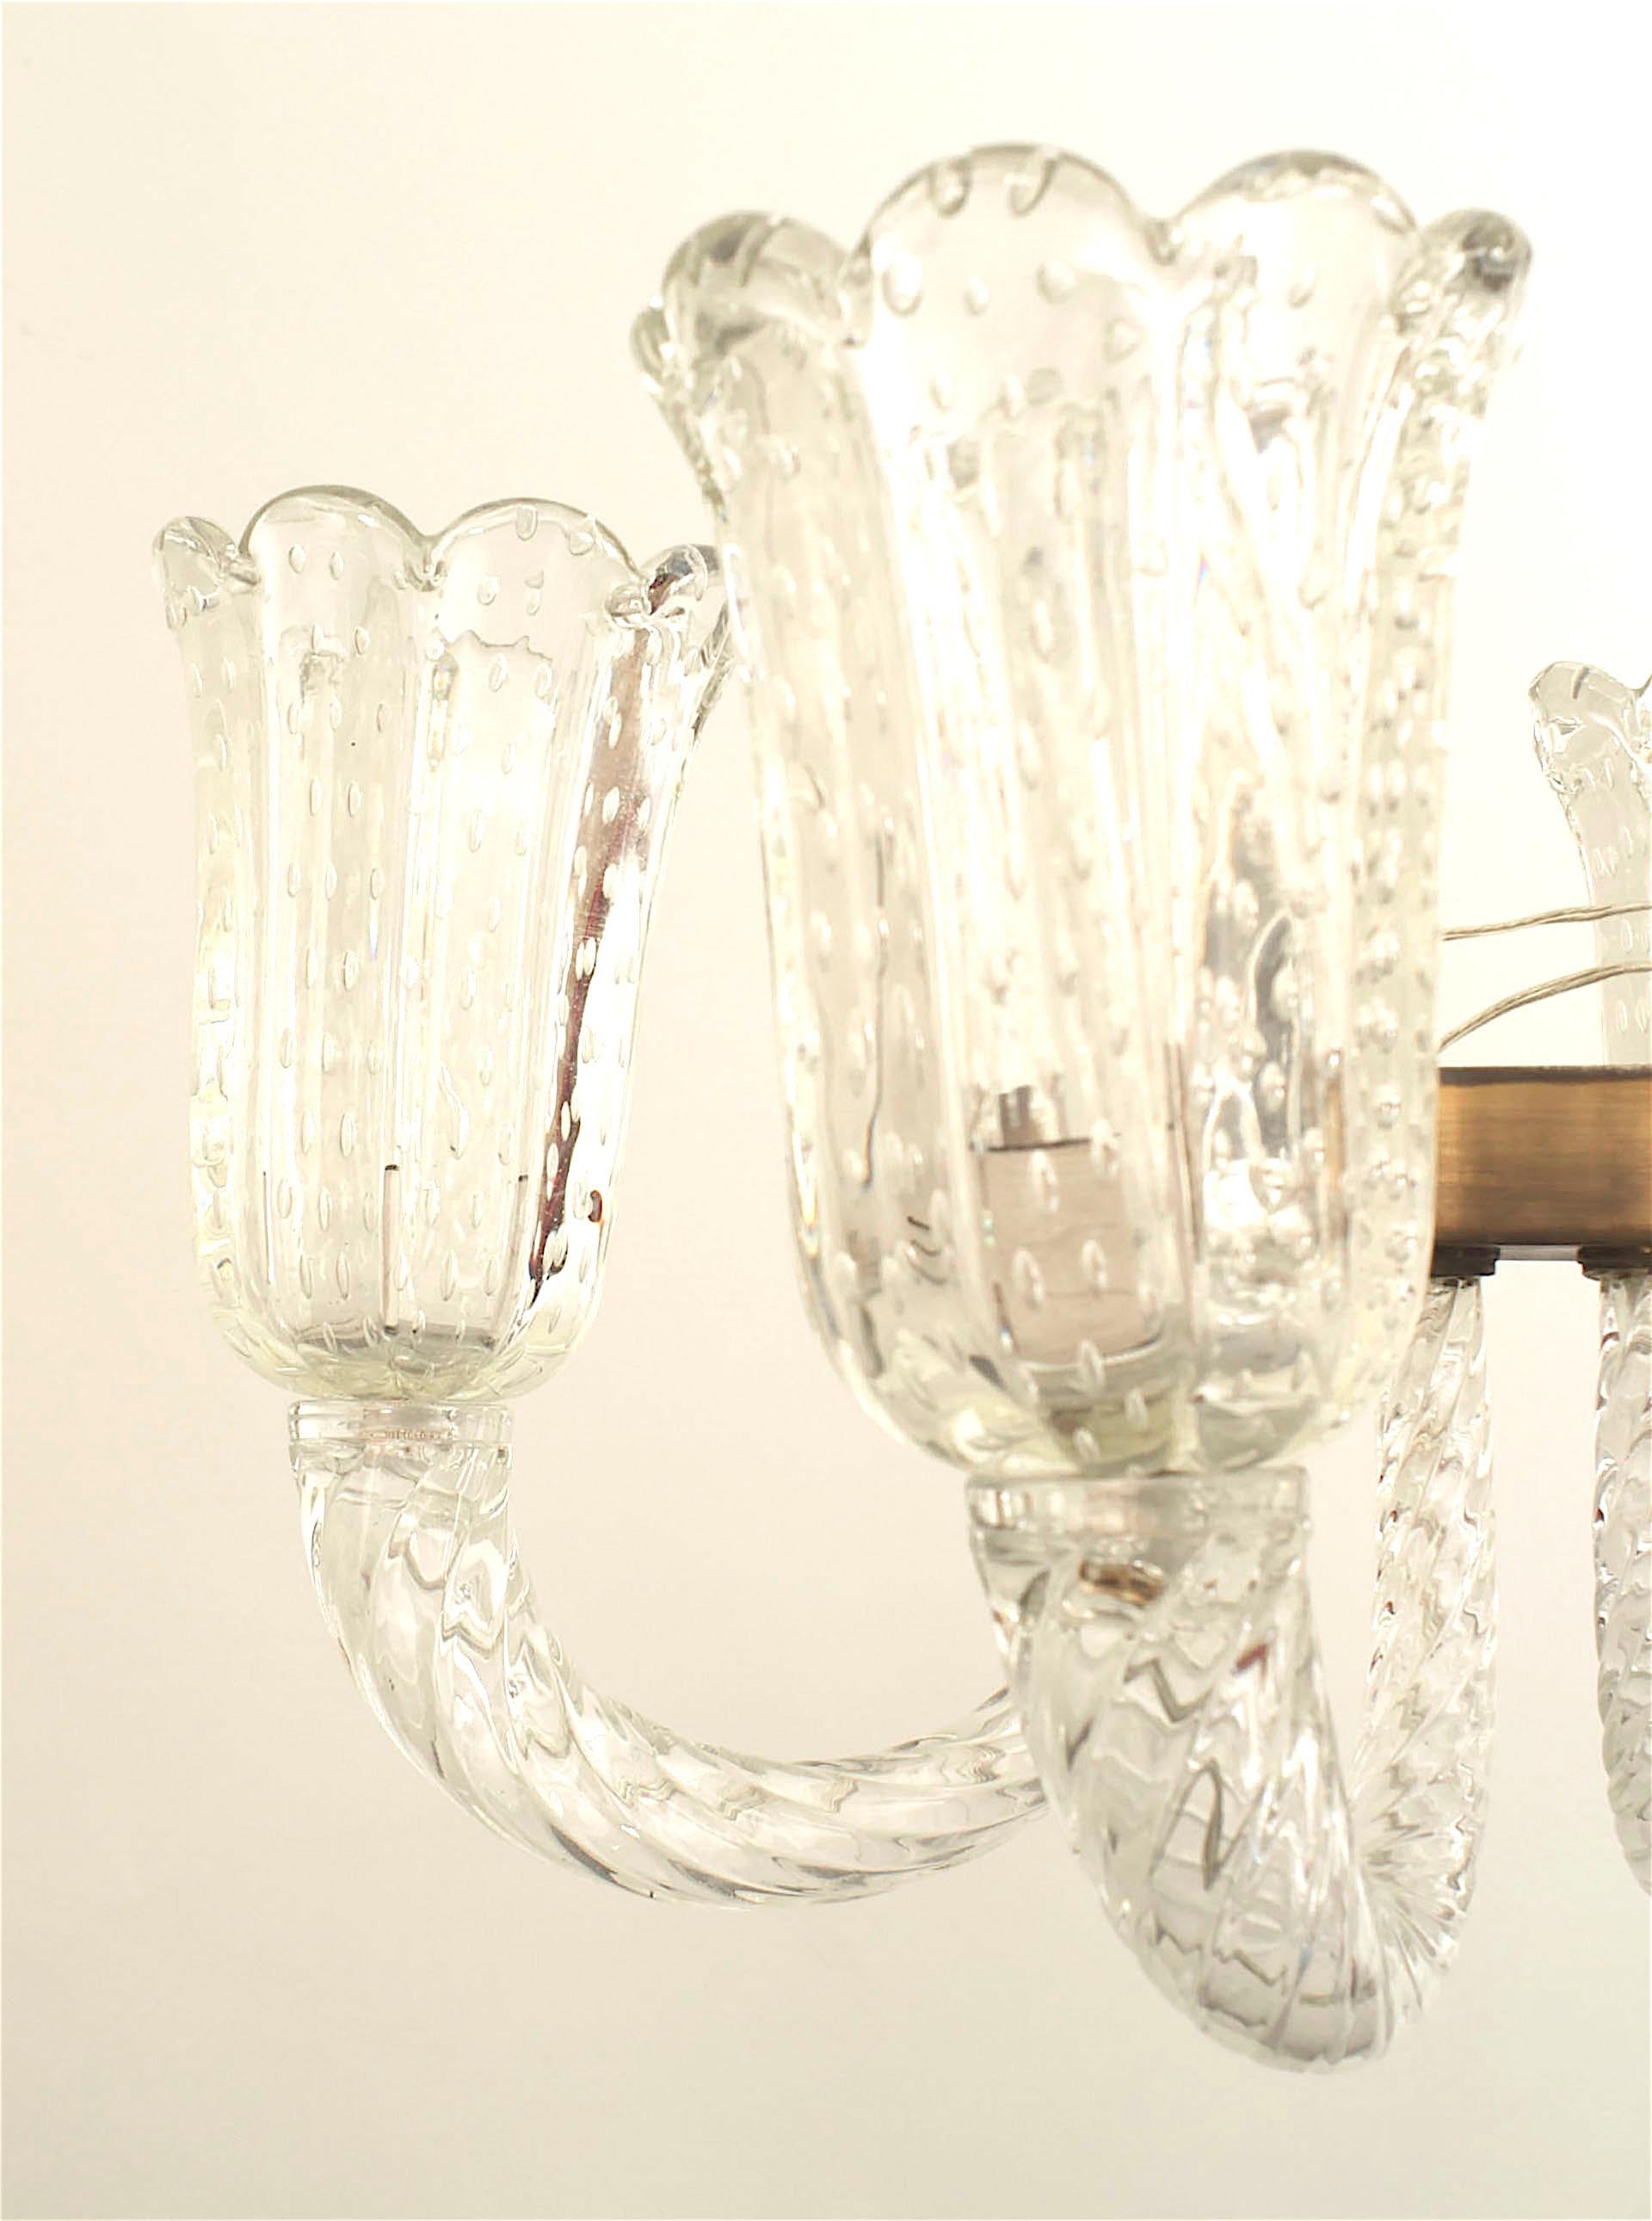 Italian 1940s chandelier with a brass horizontal frame supporting 6 swirl clear glass arms holding large internal bubble fluted & scalloped top glass shades suspended by a swirl centerpost. (by BAROVIER ET TOSO)
